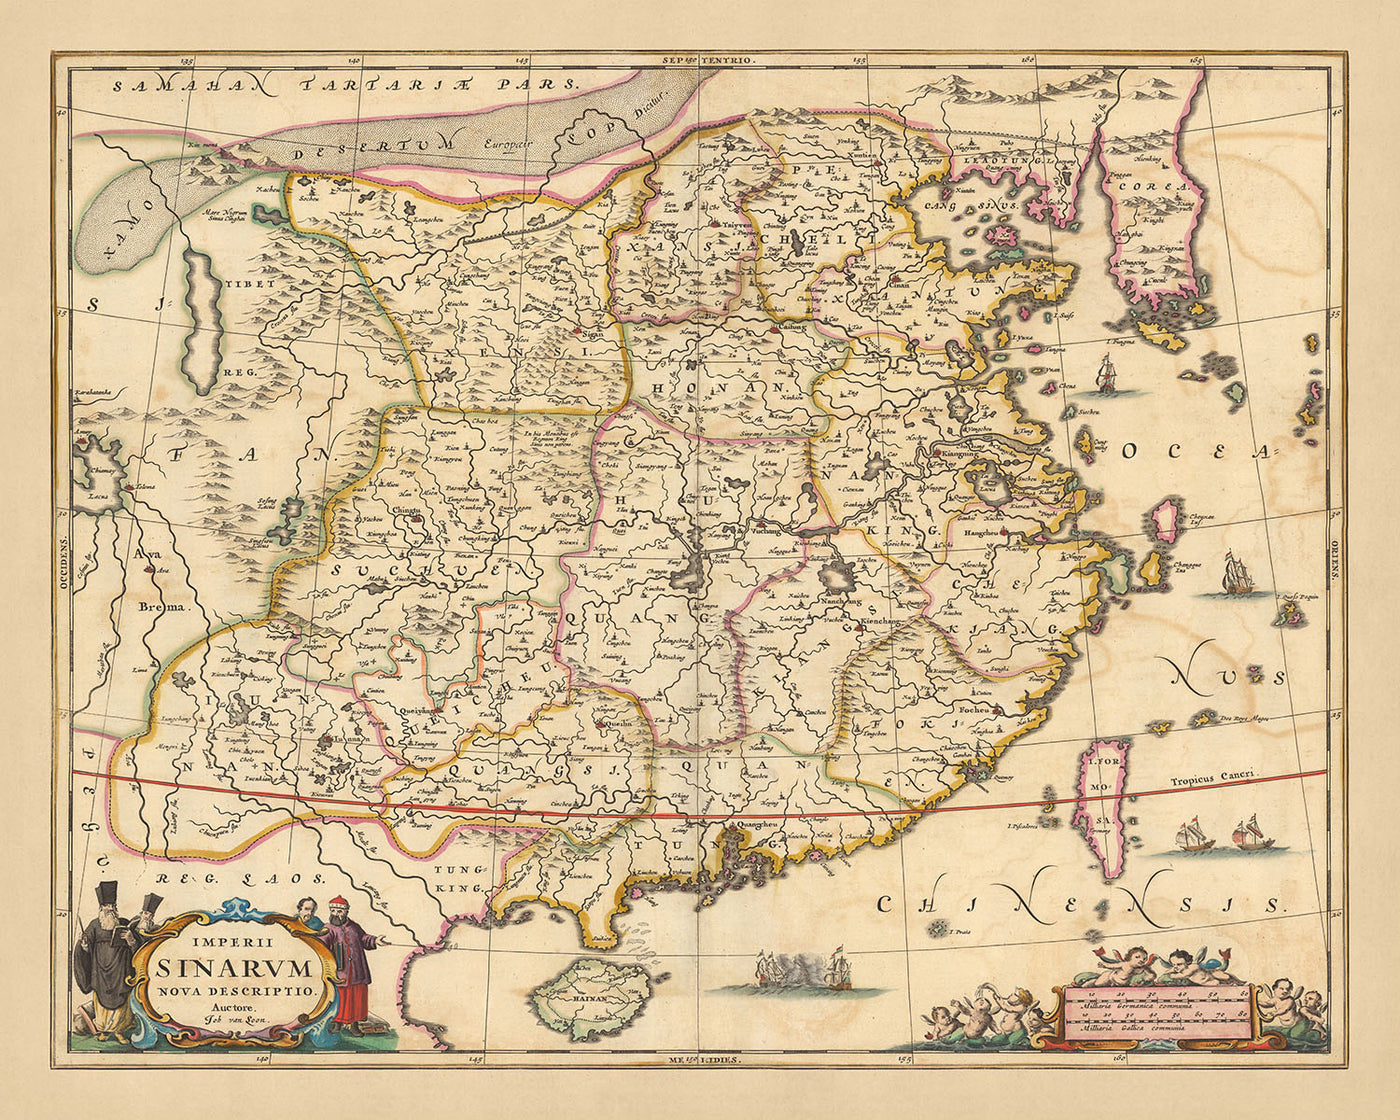 Old Map of the Chinese Empire by Visscher, 1690: Eastern China, Southern China, Taiwan, Hong Kong, Macao